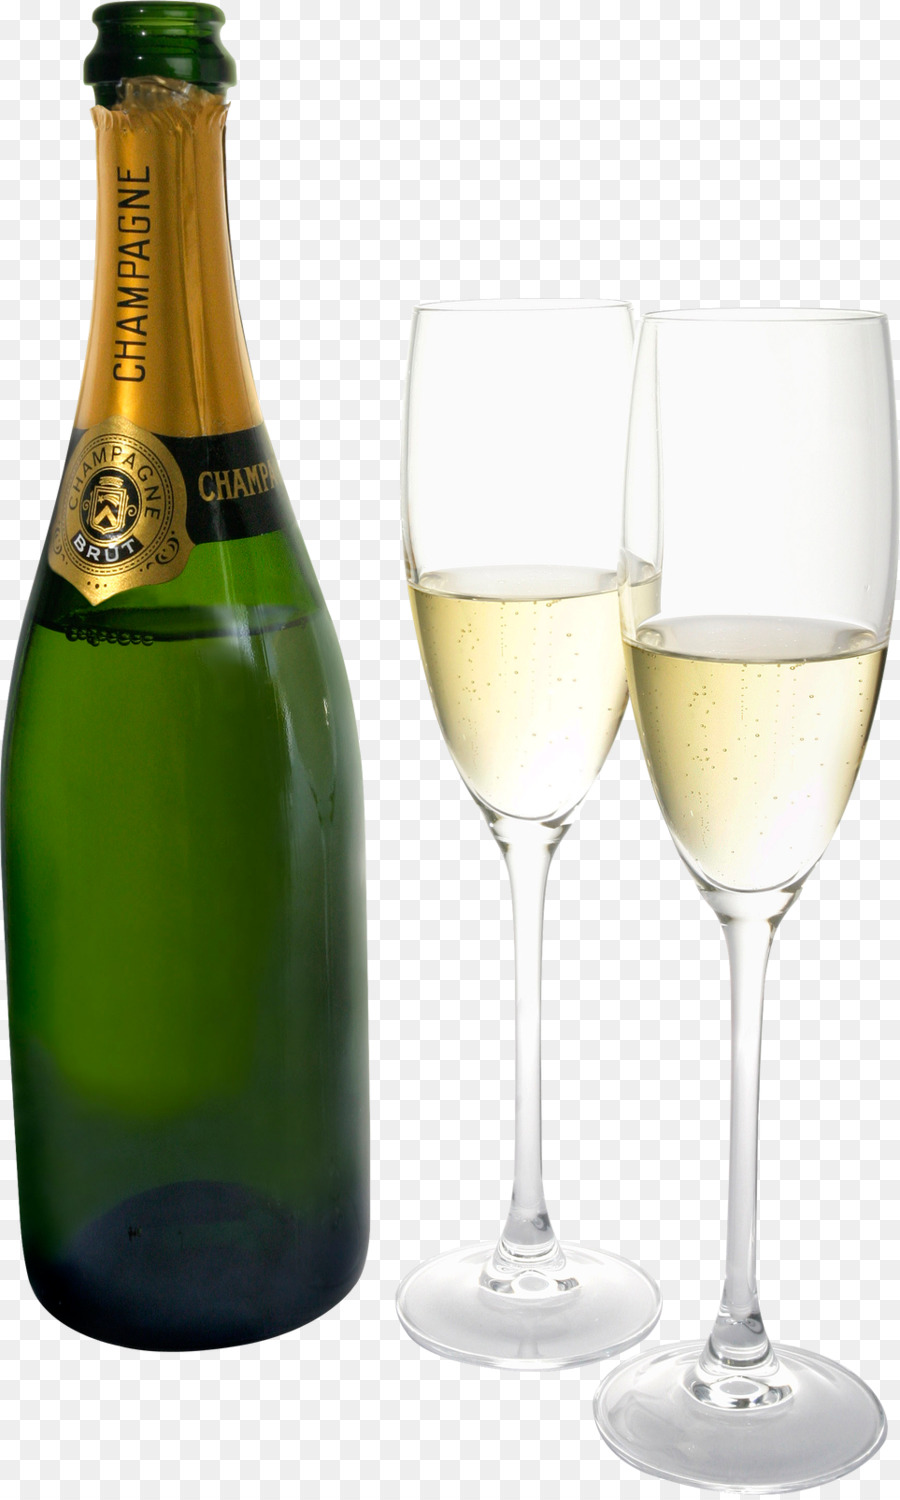 Champagne glass Sparkling wine - champagne png download - 963*1600 - Free Transparent Champagne png Download.